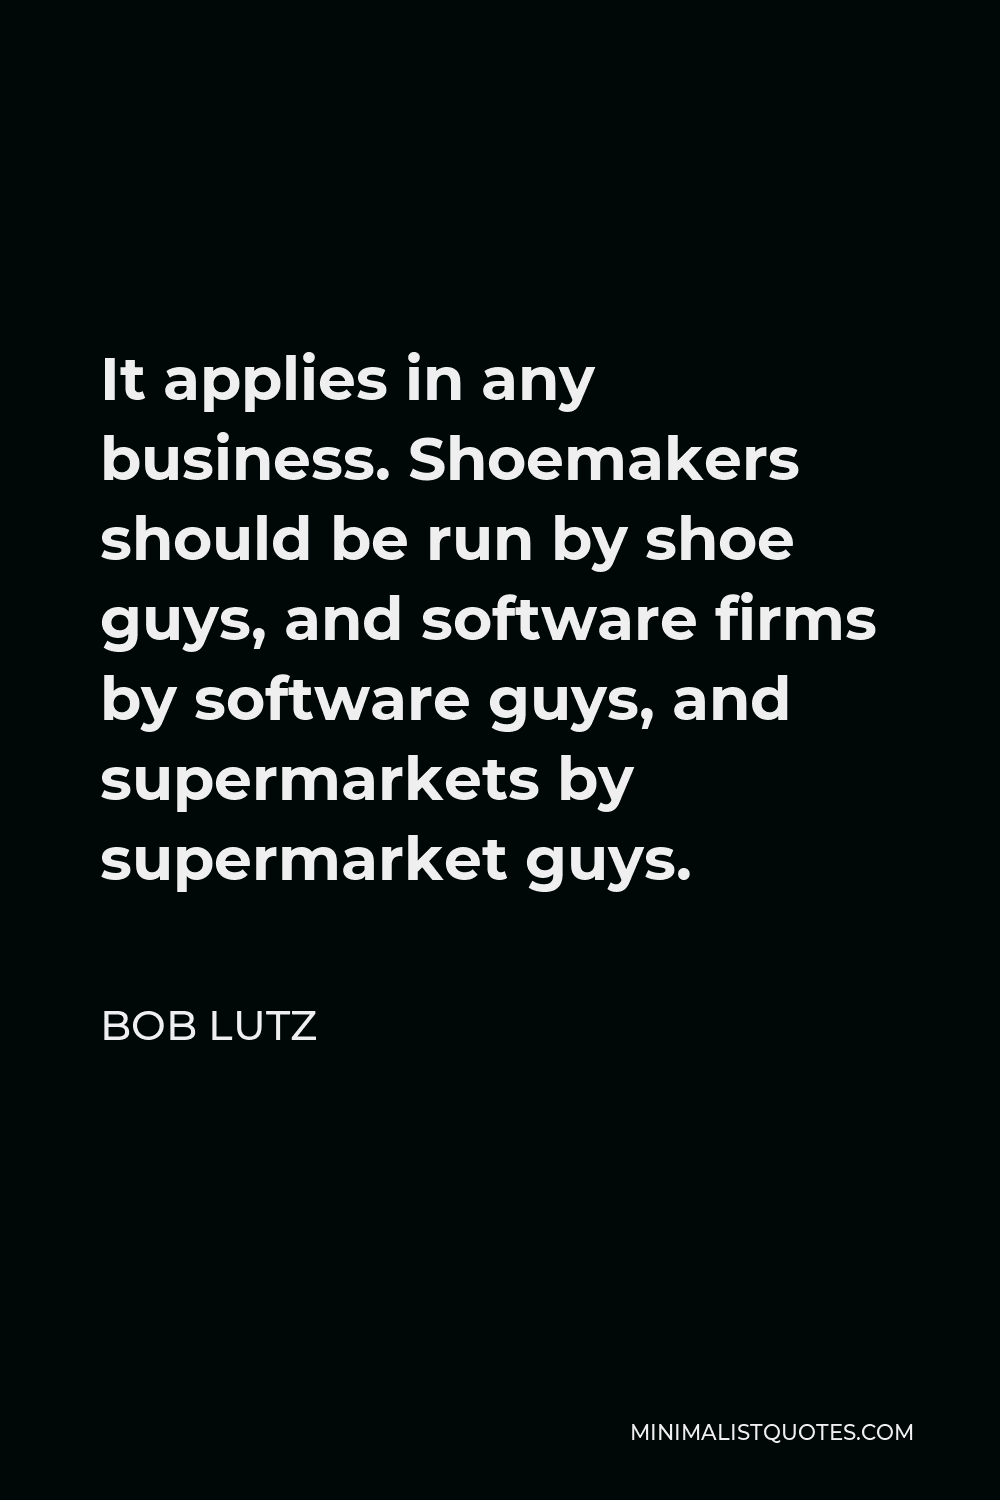 Bob Lutz Quote - It applies in any business. Shoemakers should be run by shoe guys, and software firms by software guys, and supermarkets by supermarket guys.